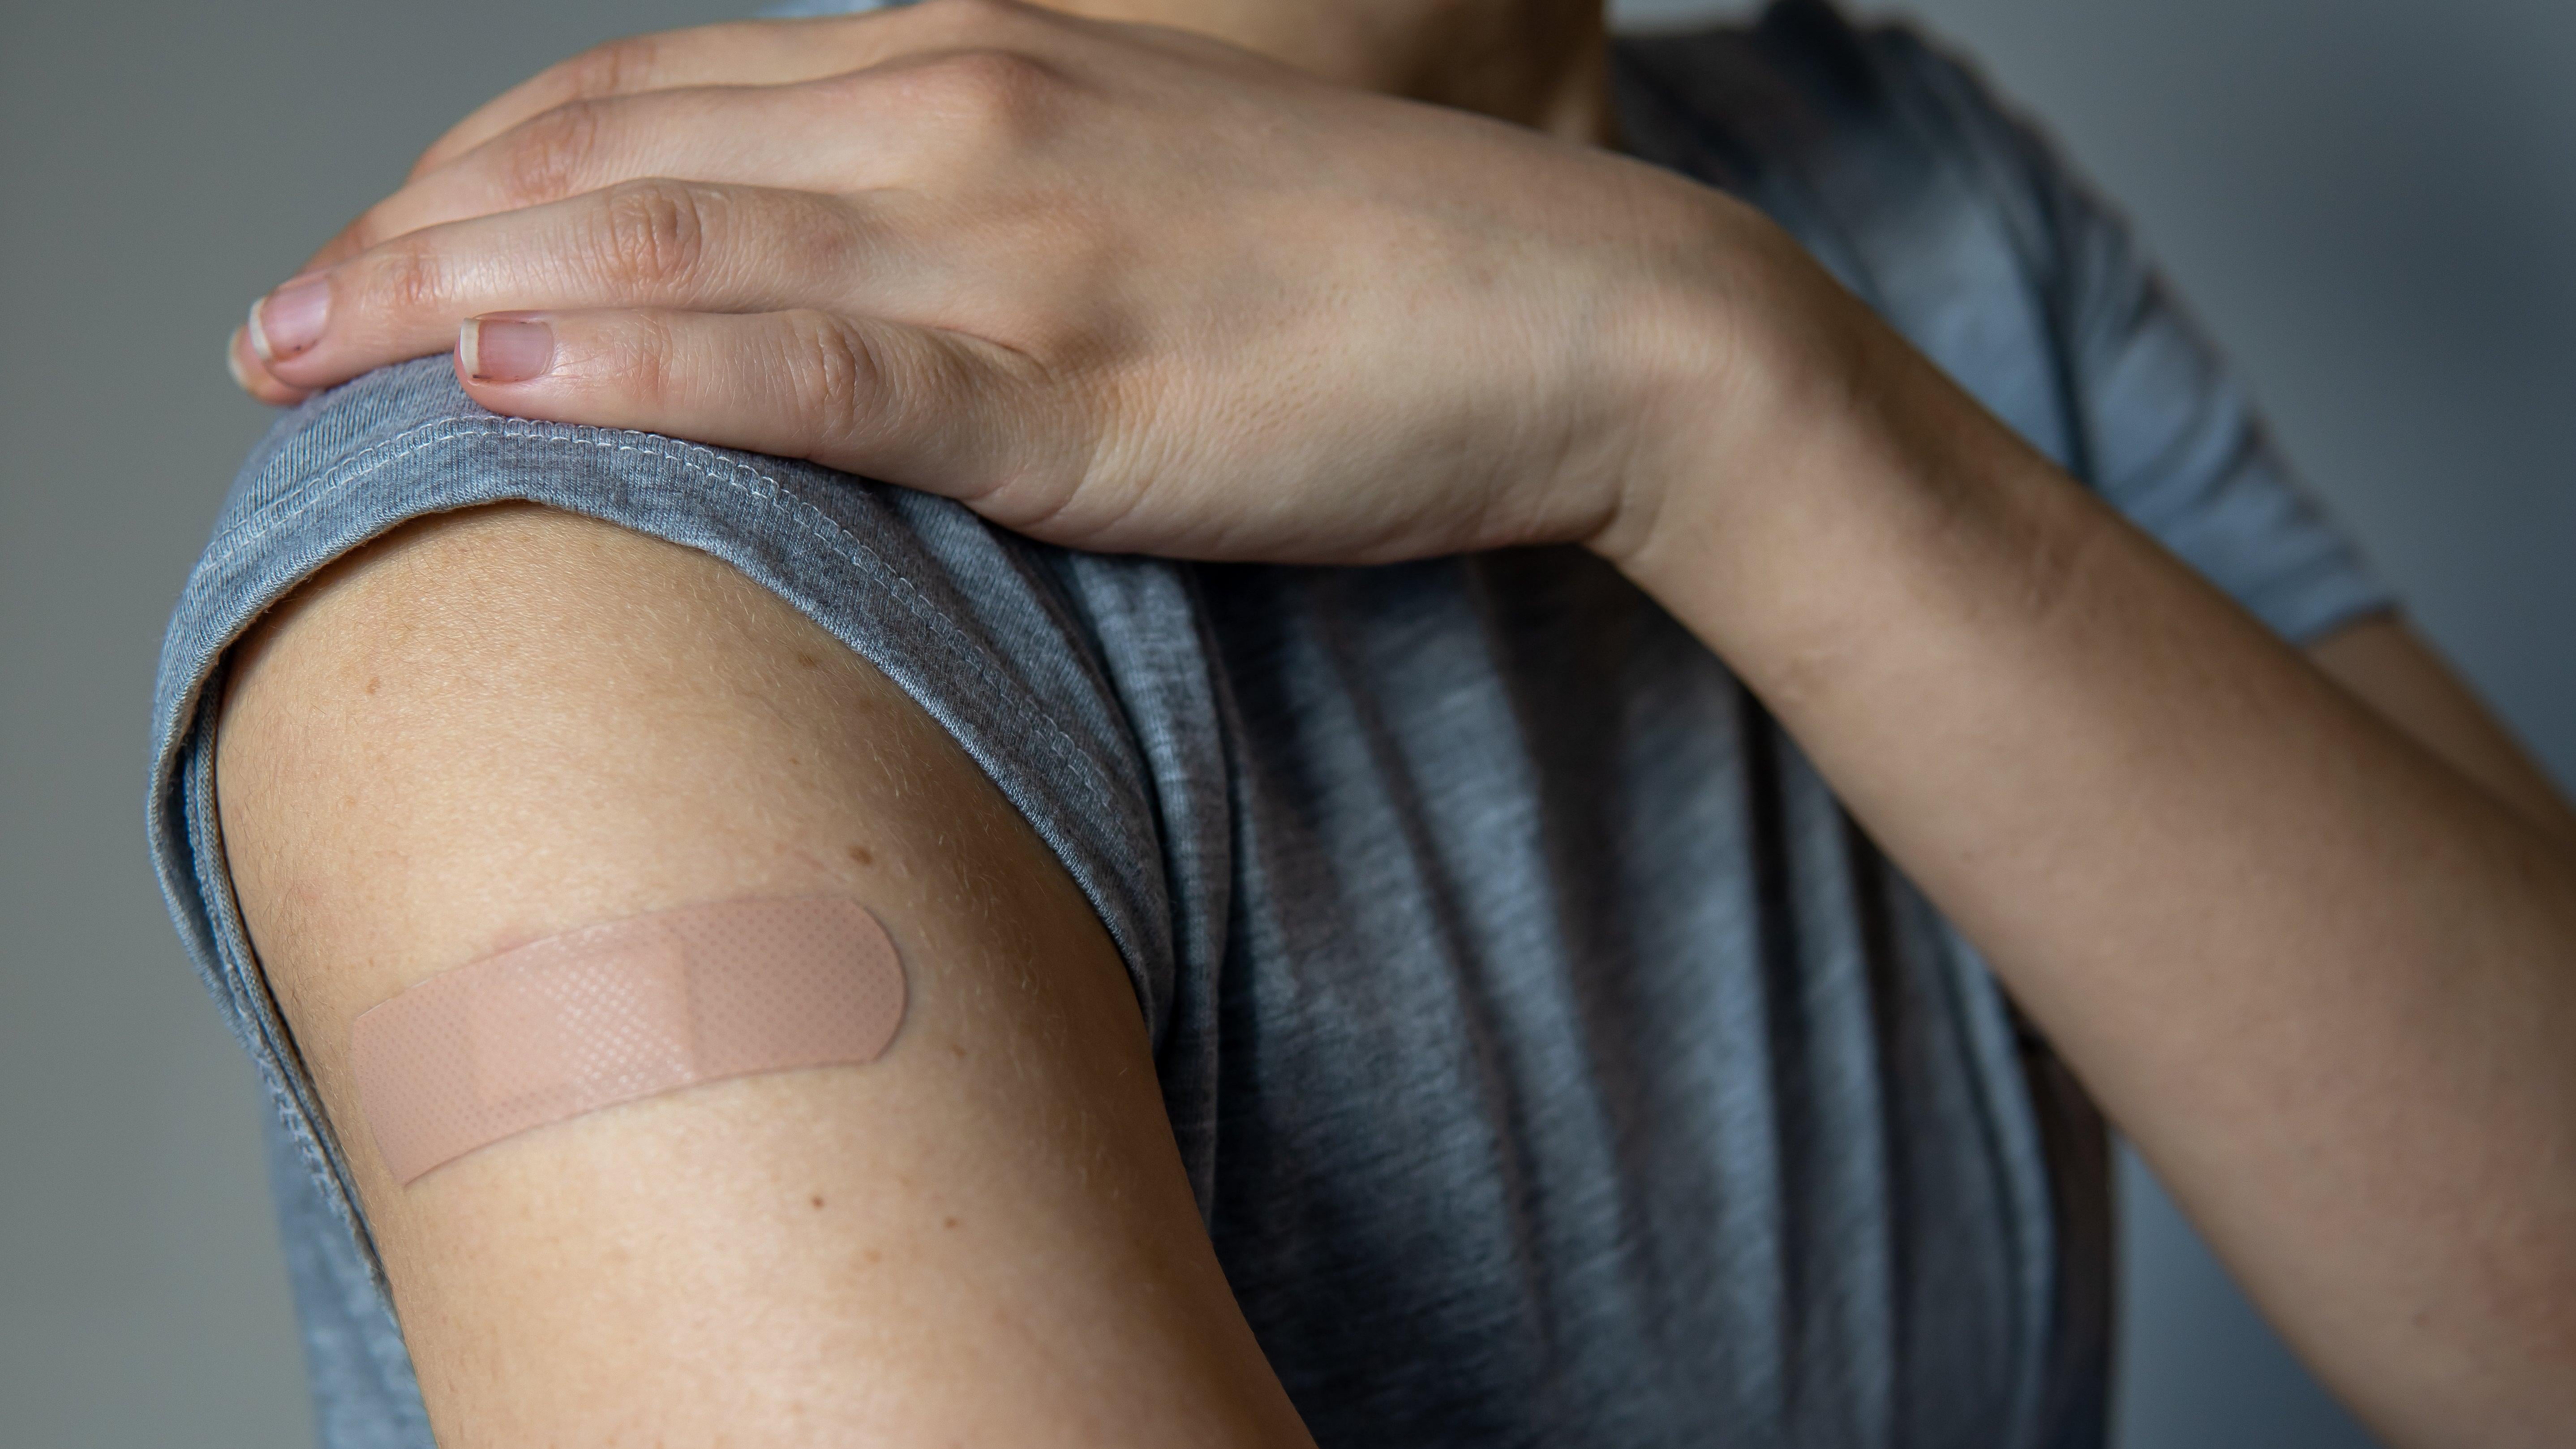 Can You Get Your Flu Shot and COVID Booster in the Same Arm?